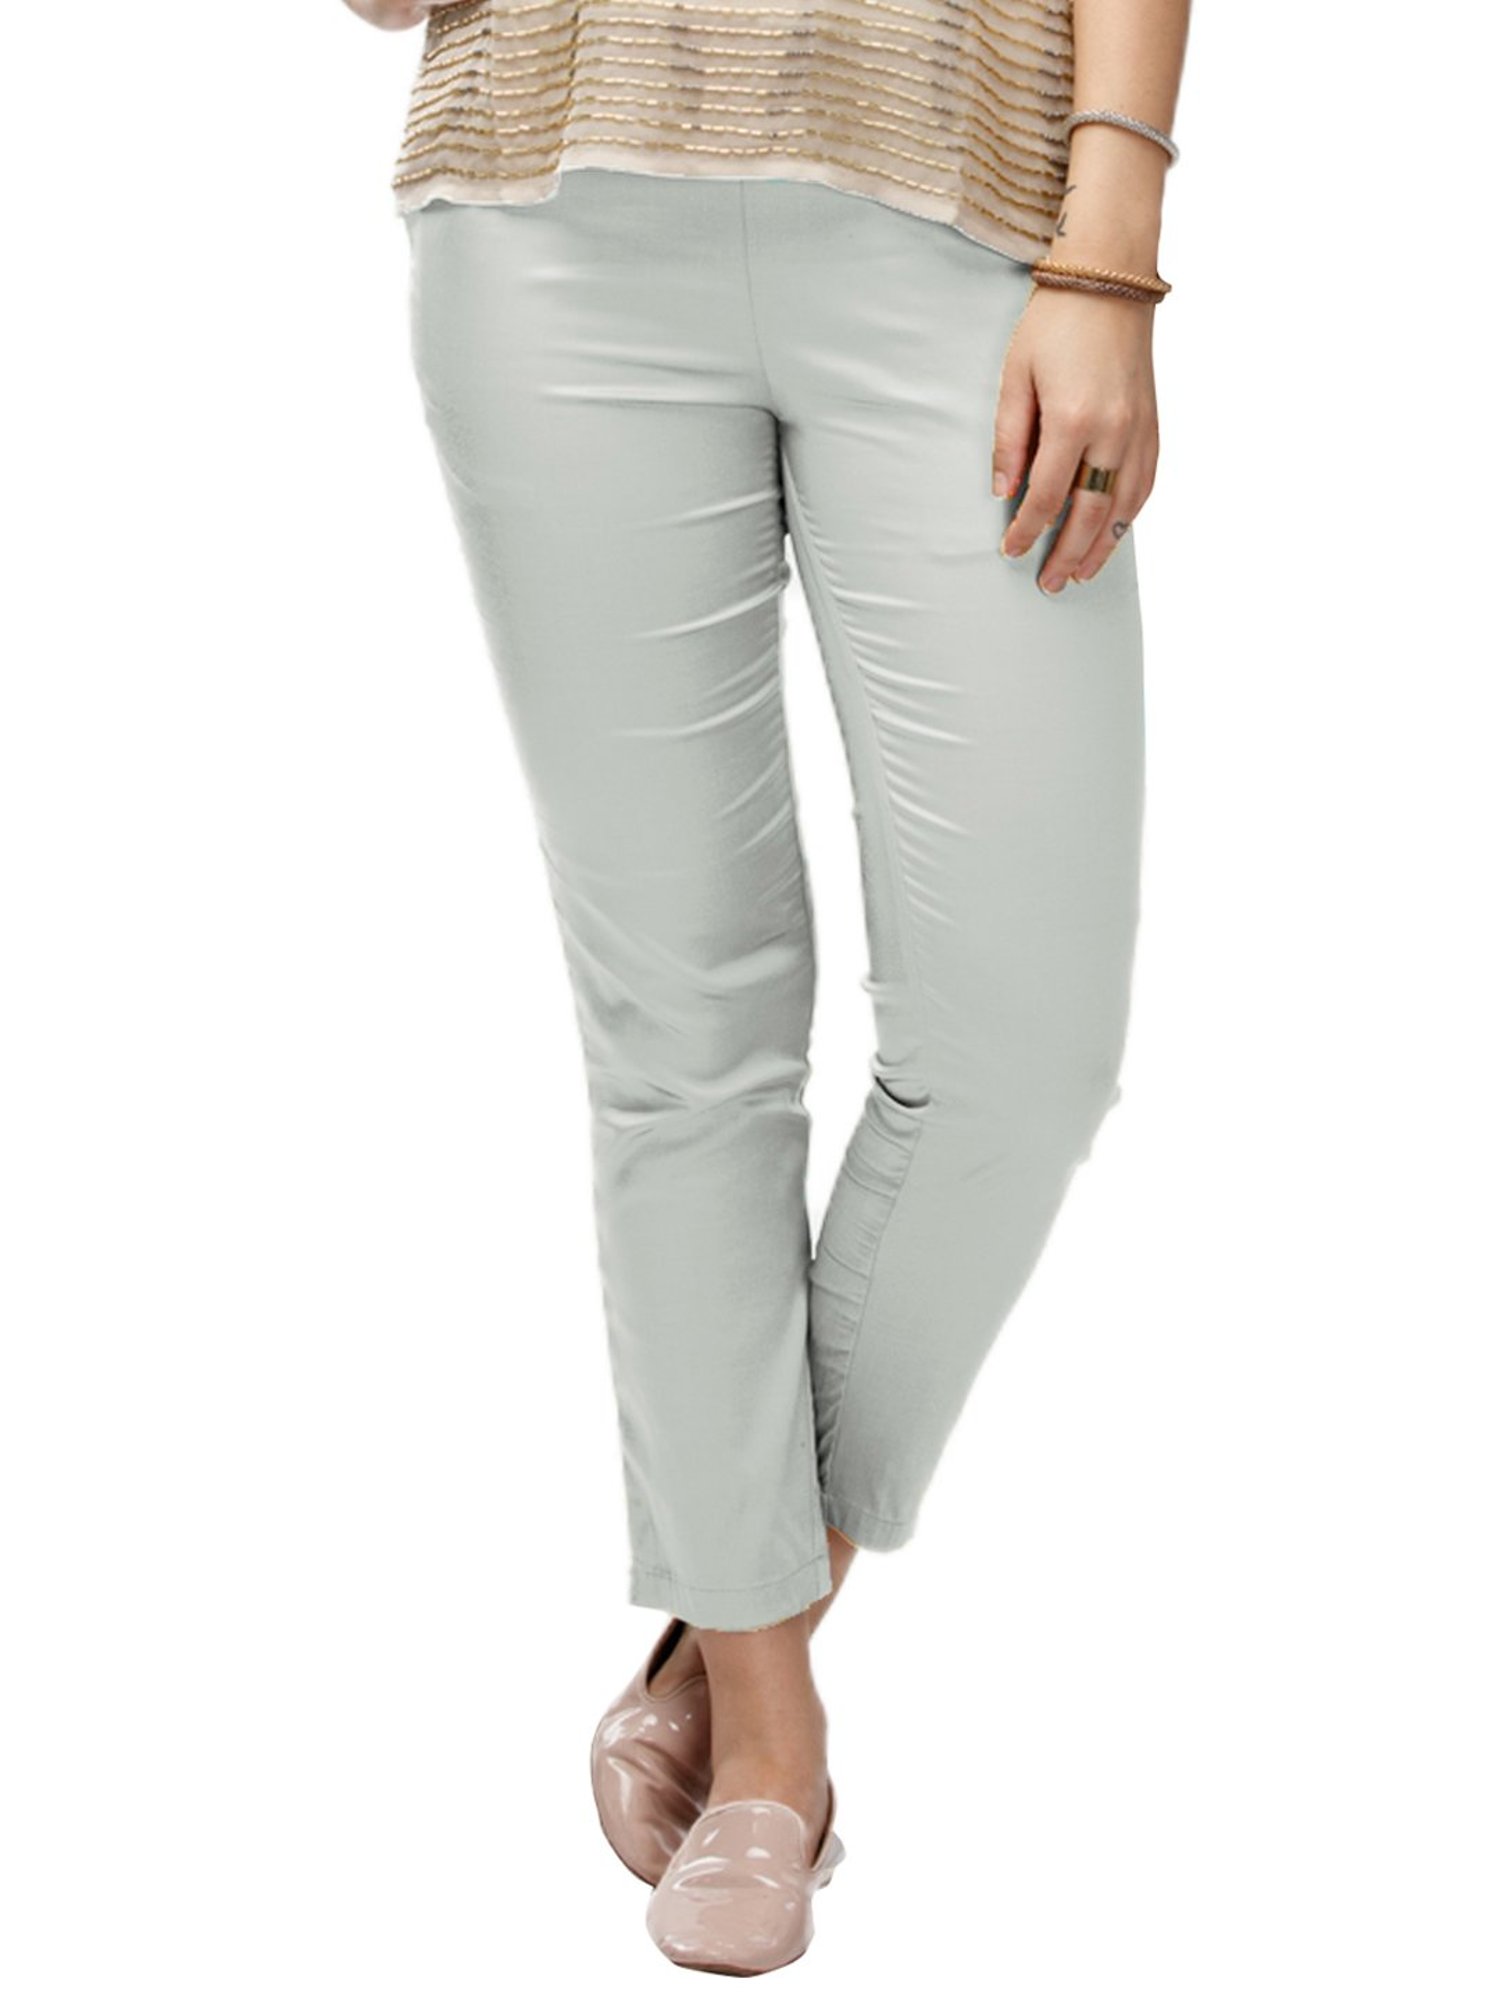 Go Colors Pants : Buy Go Colors Women Solid Wheat Mid Rise Cotton Pants  Online | Nykaa Fashion